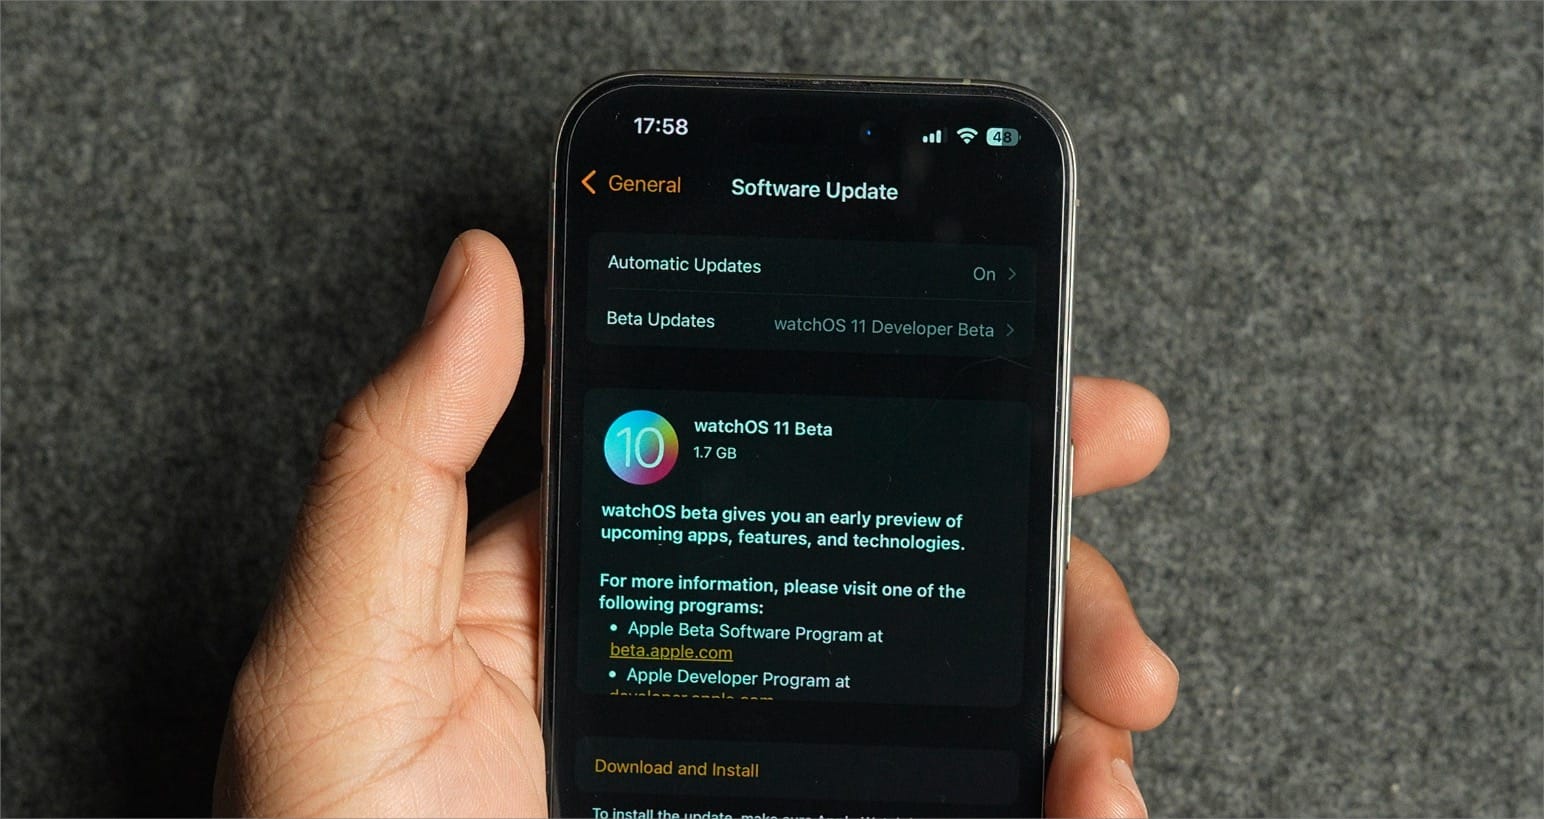 Download and install watchOS 11 beta